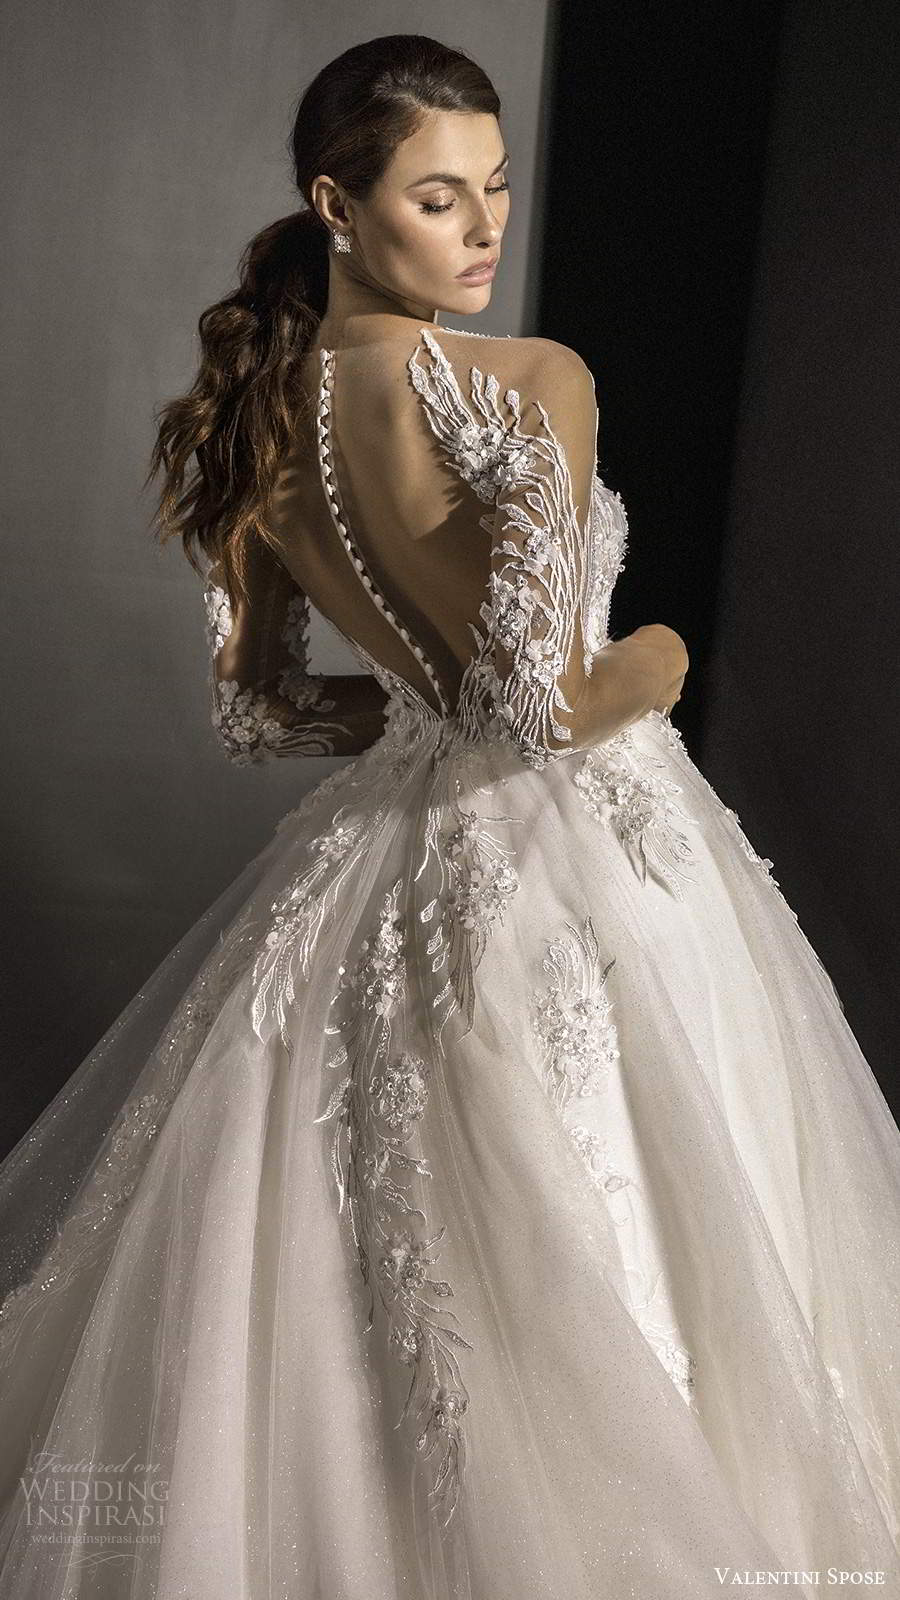 valentini spose fall 2020 bridal illusion 3 quarter sleeves queen anne neckline fully embellished lace a line ball gown wedding dress chapel train (2) zbv